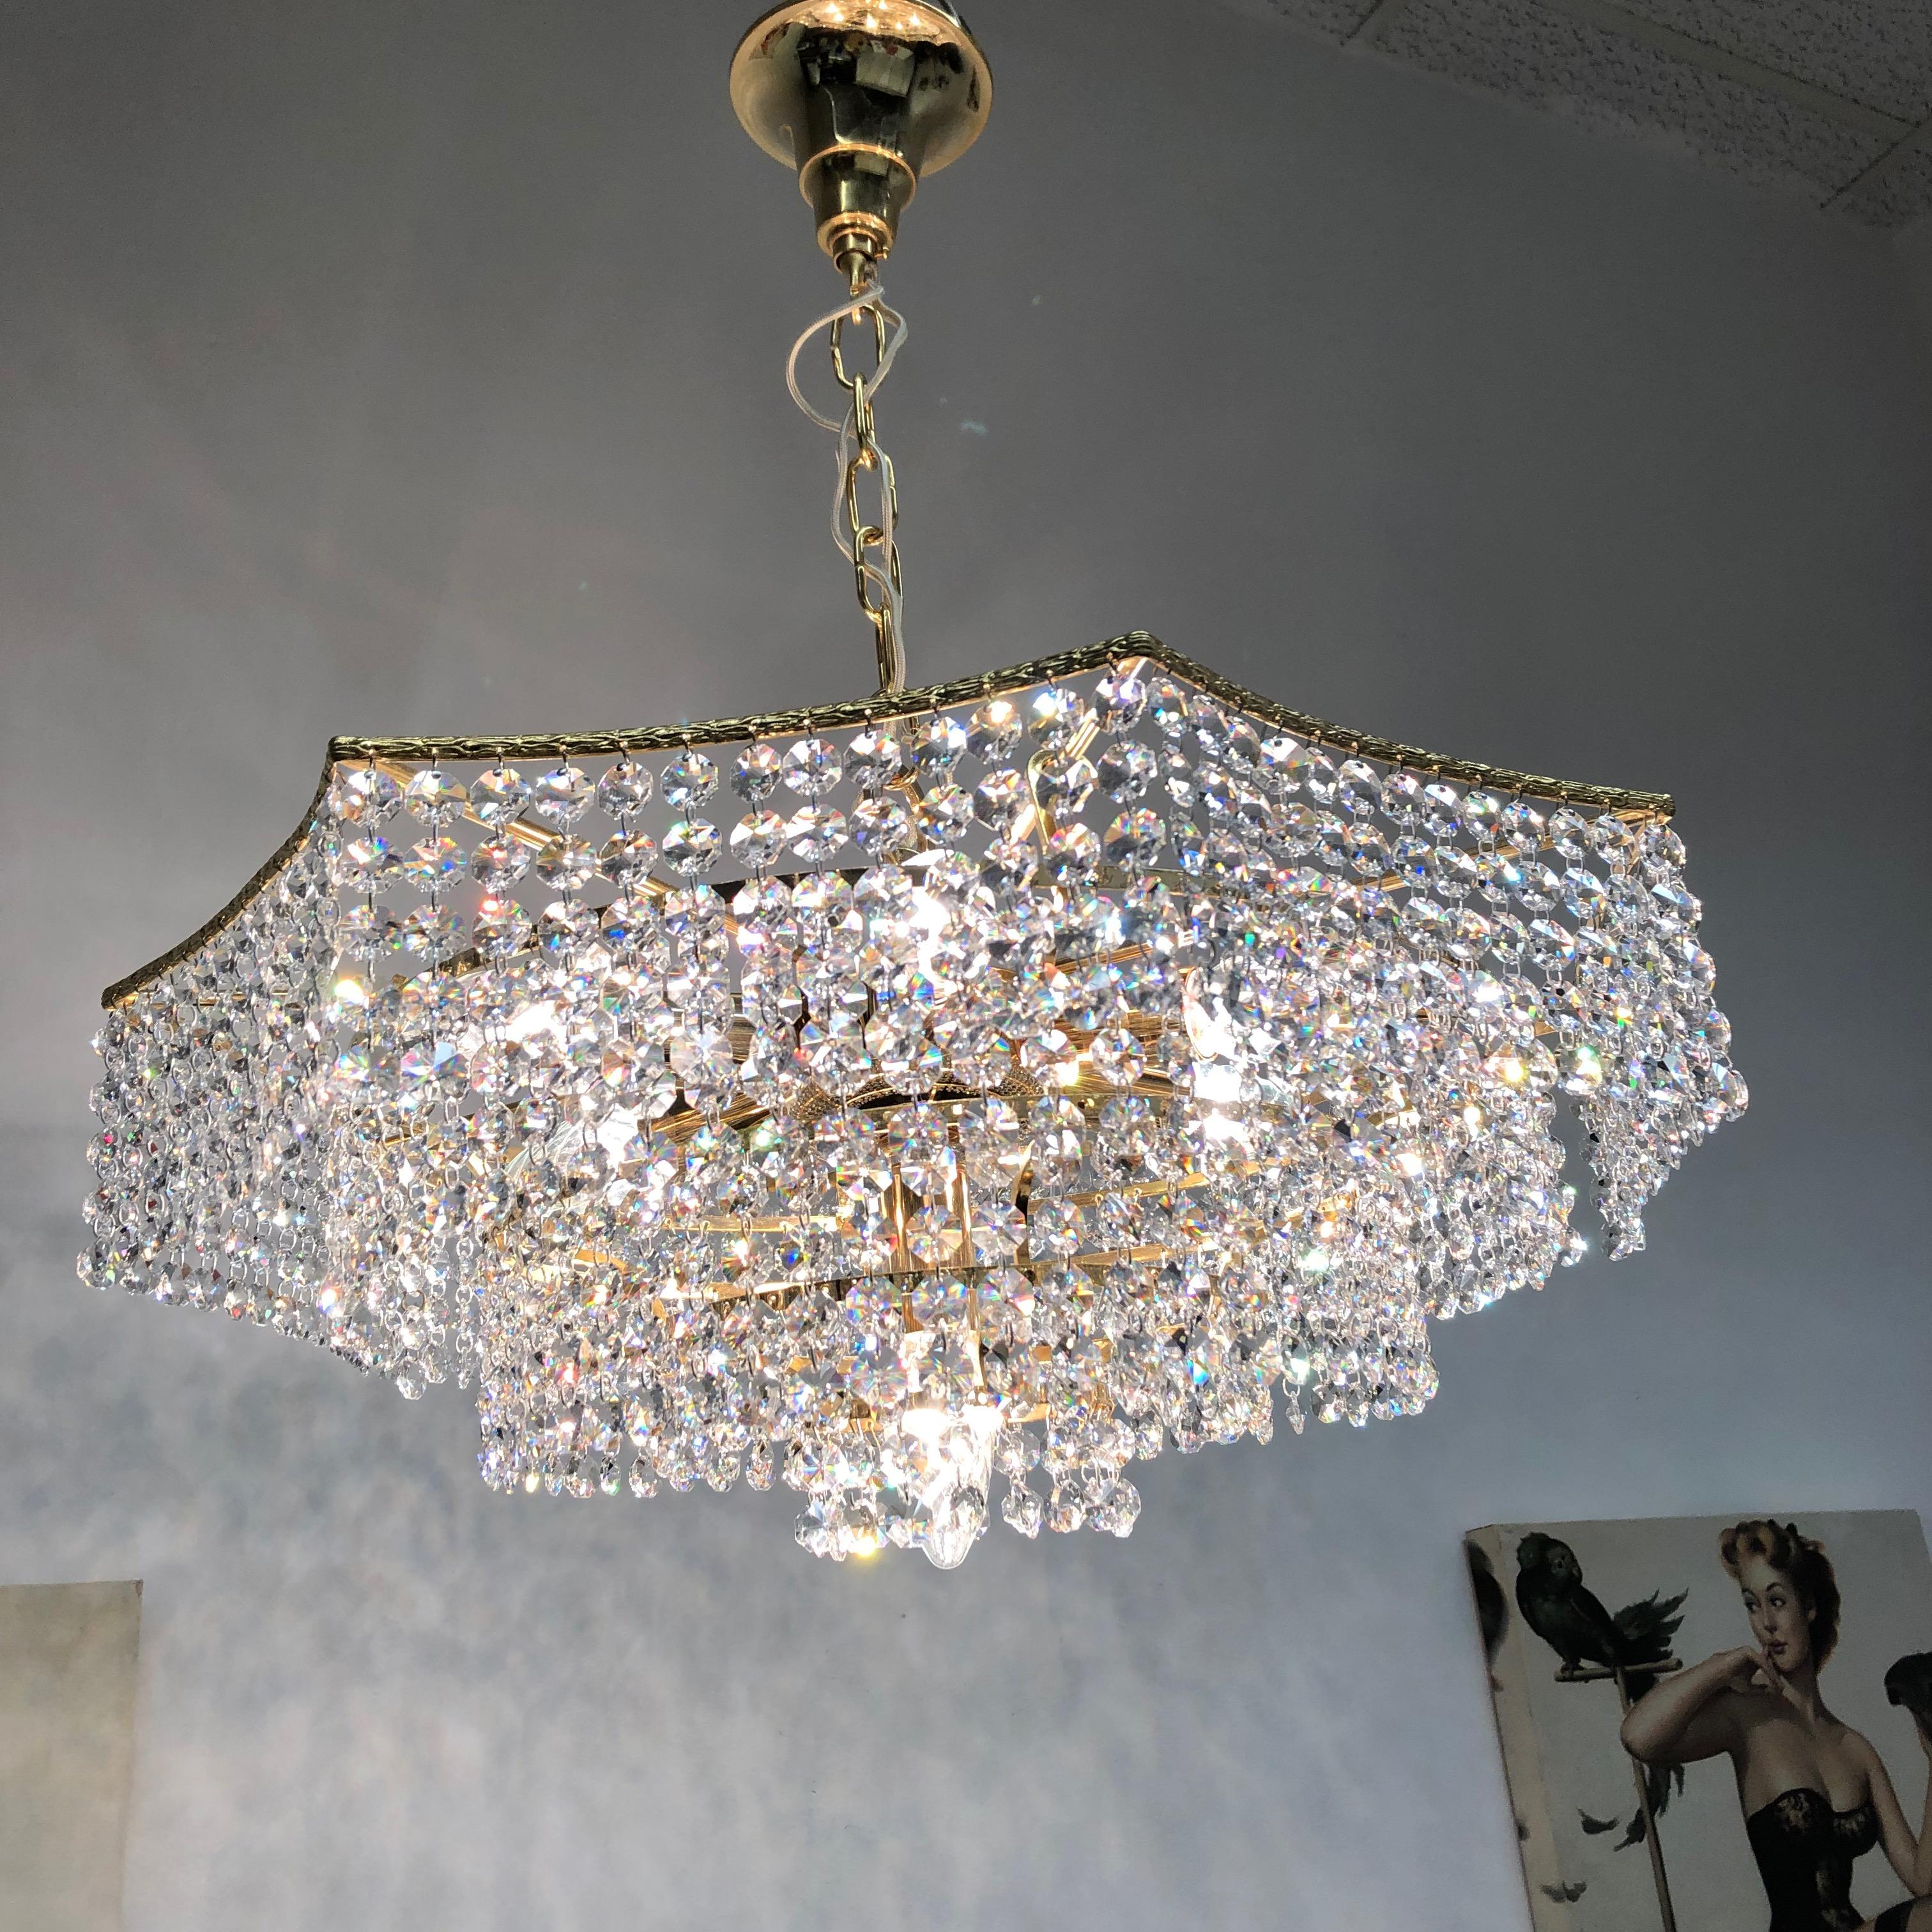 Brass and Crystal Glass Waterfall Chandelier, Richard Essig, Germany, 1960s For Sale 10